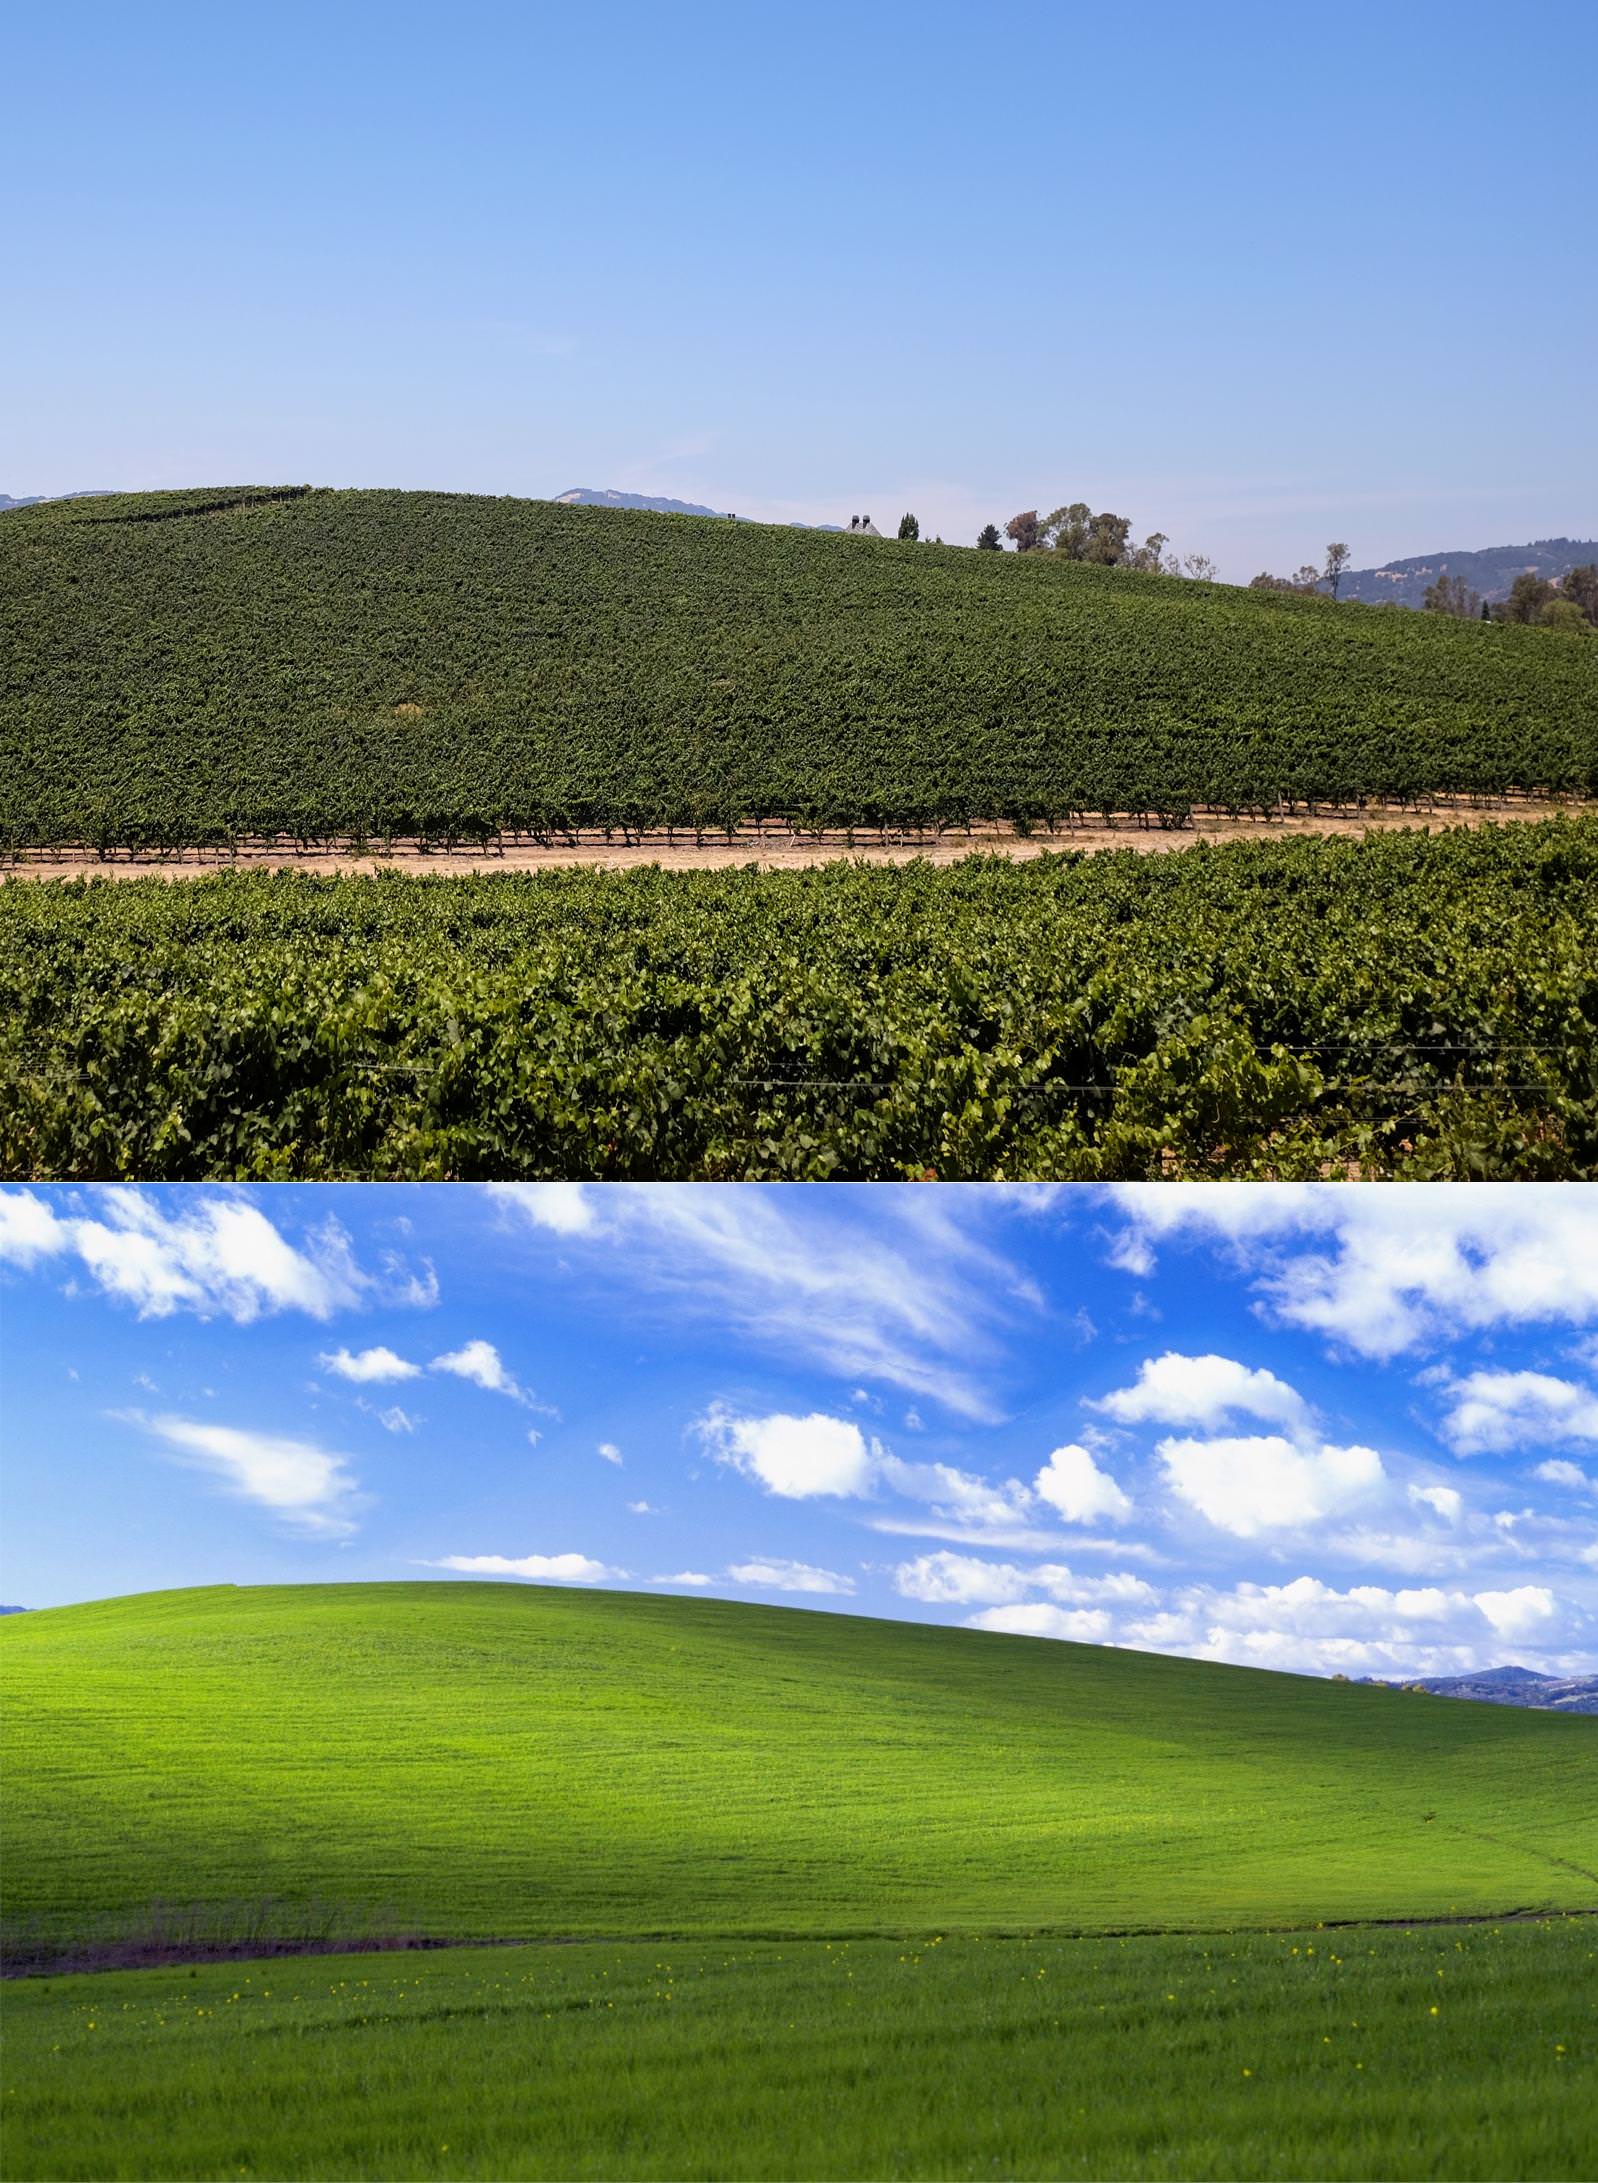 4CYCLISTS version of iconic Windows XP wallpaper